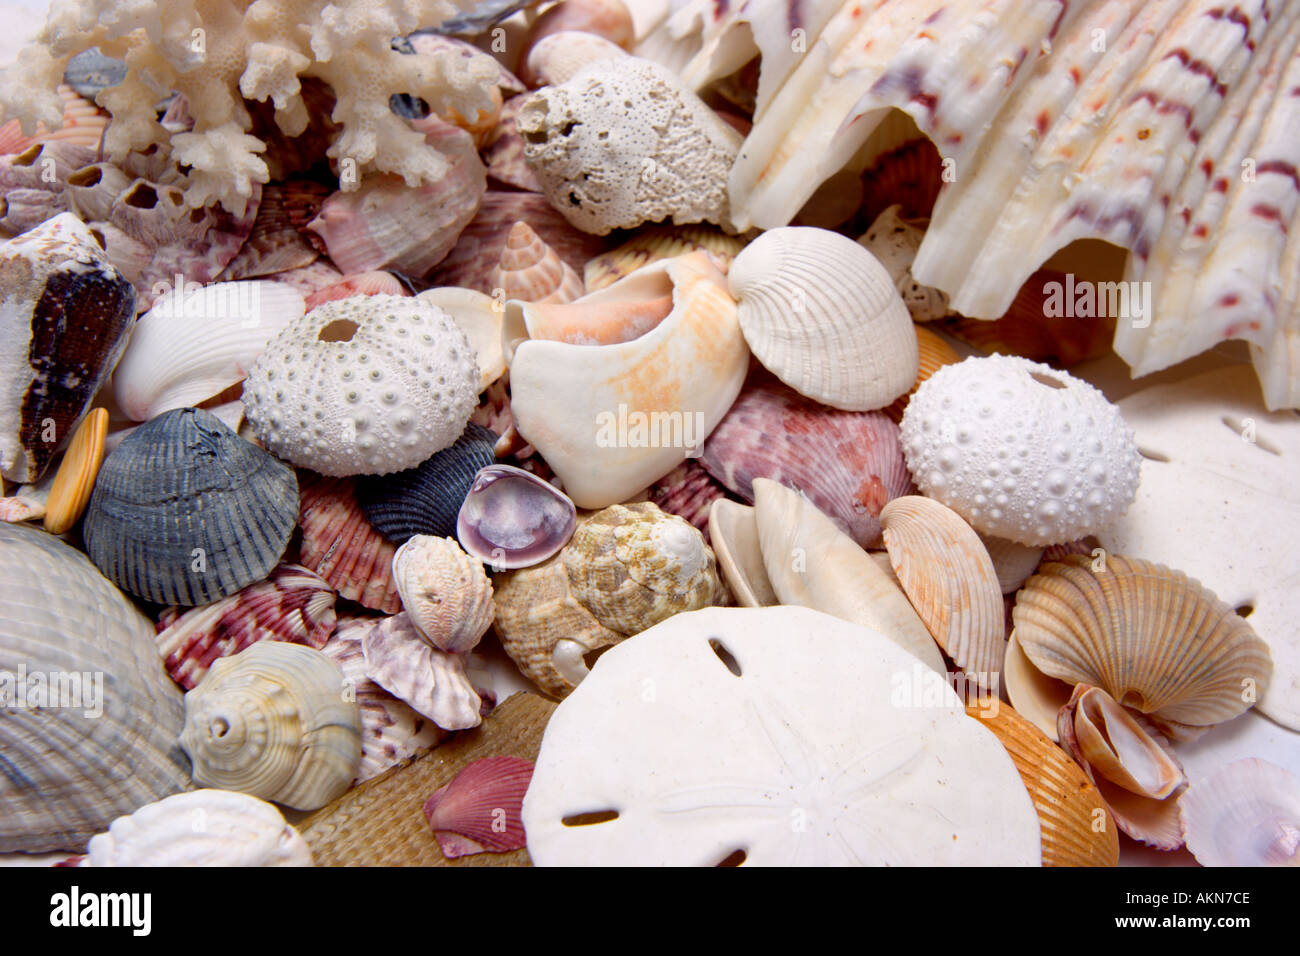 Variety of colorful sea shells Stock Photo